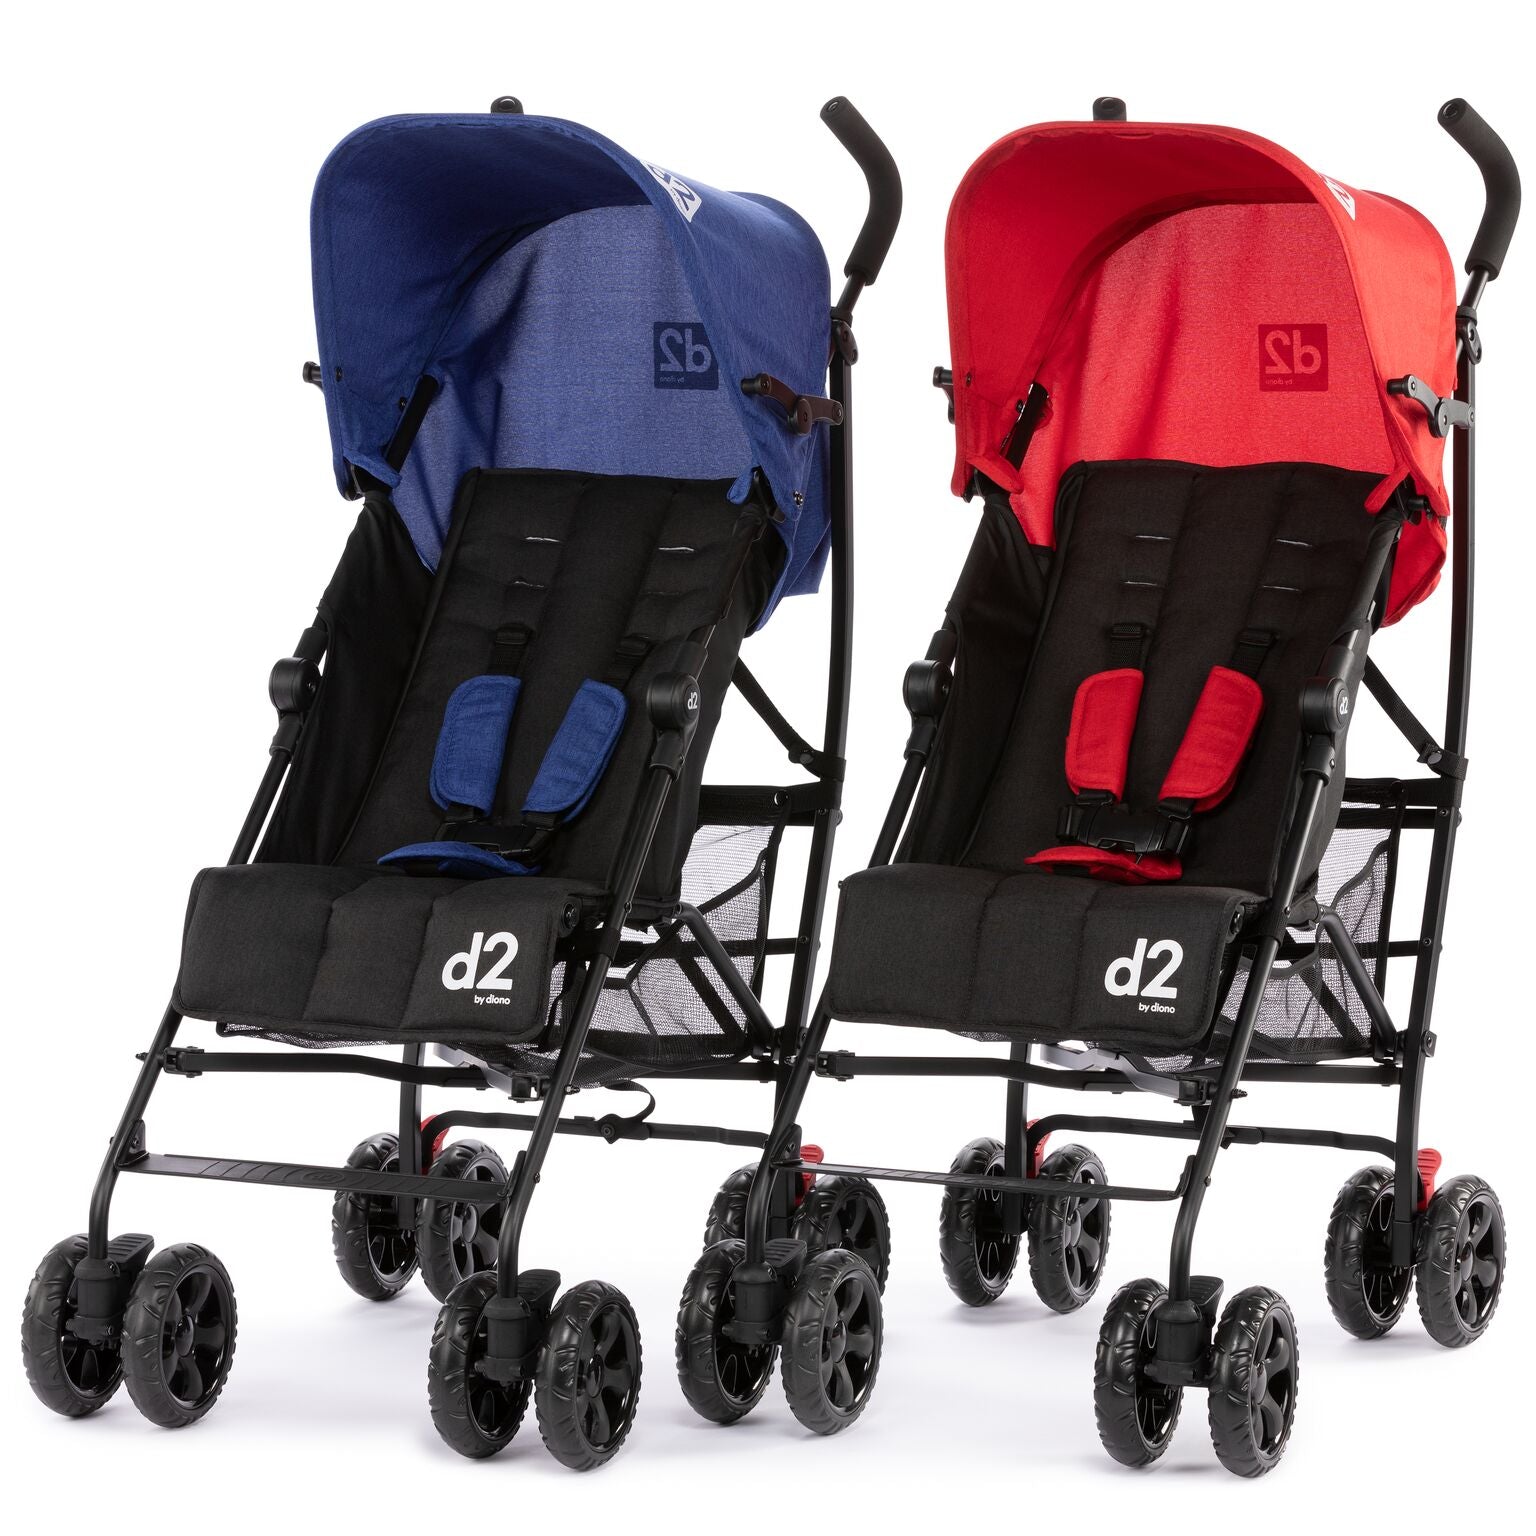 Stow n' Go®  diono® Strollers & Stroller Accessories